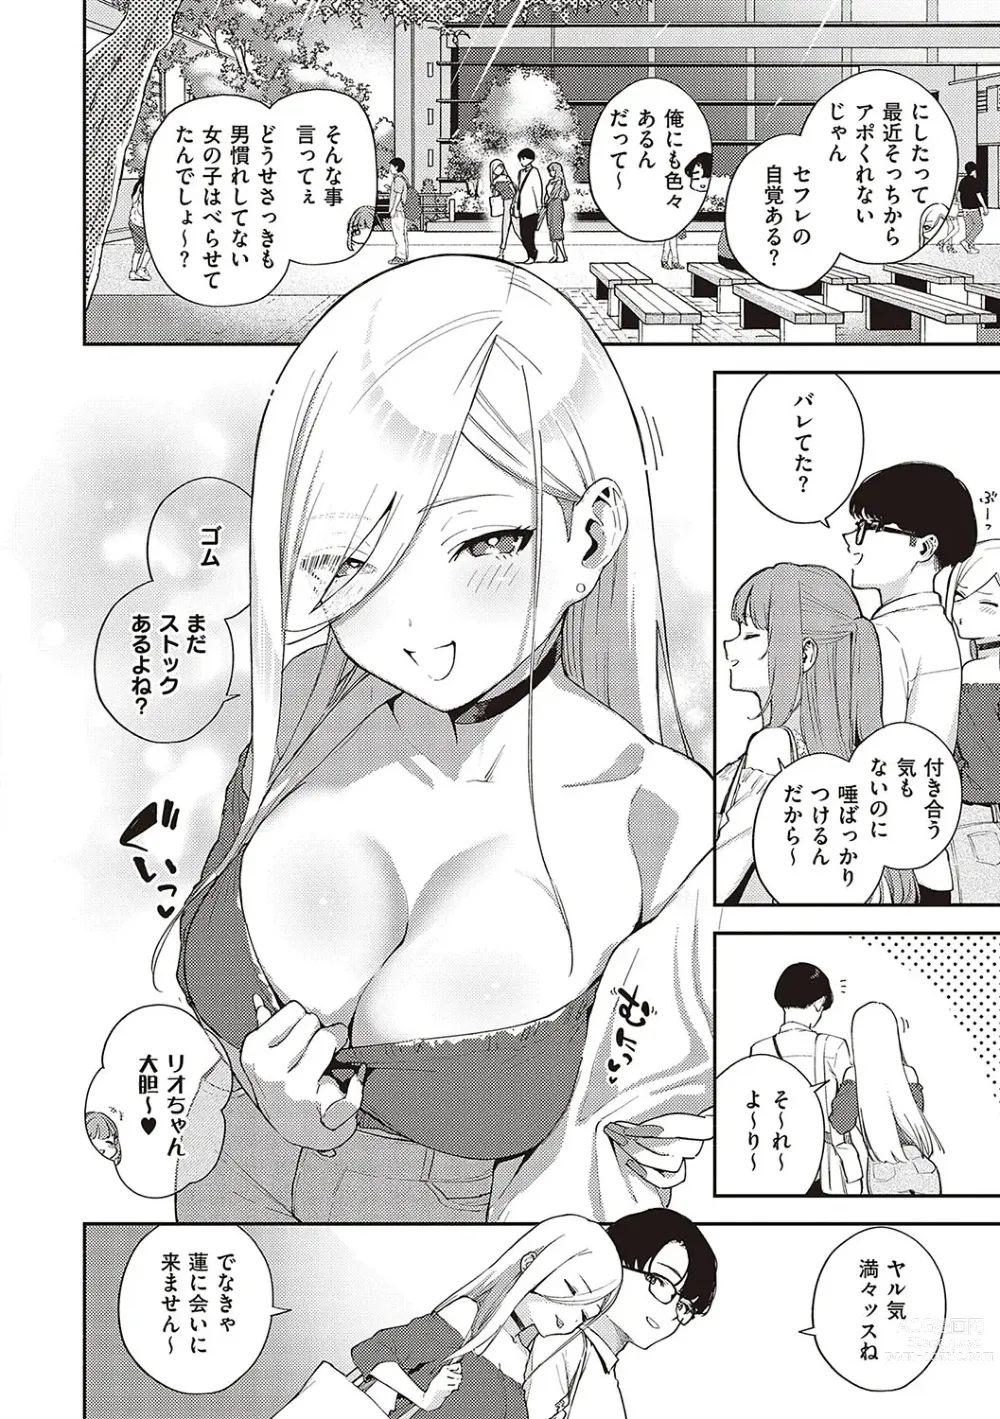 Page 5 of manga Bitter Sweet Complex